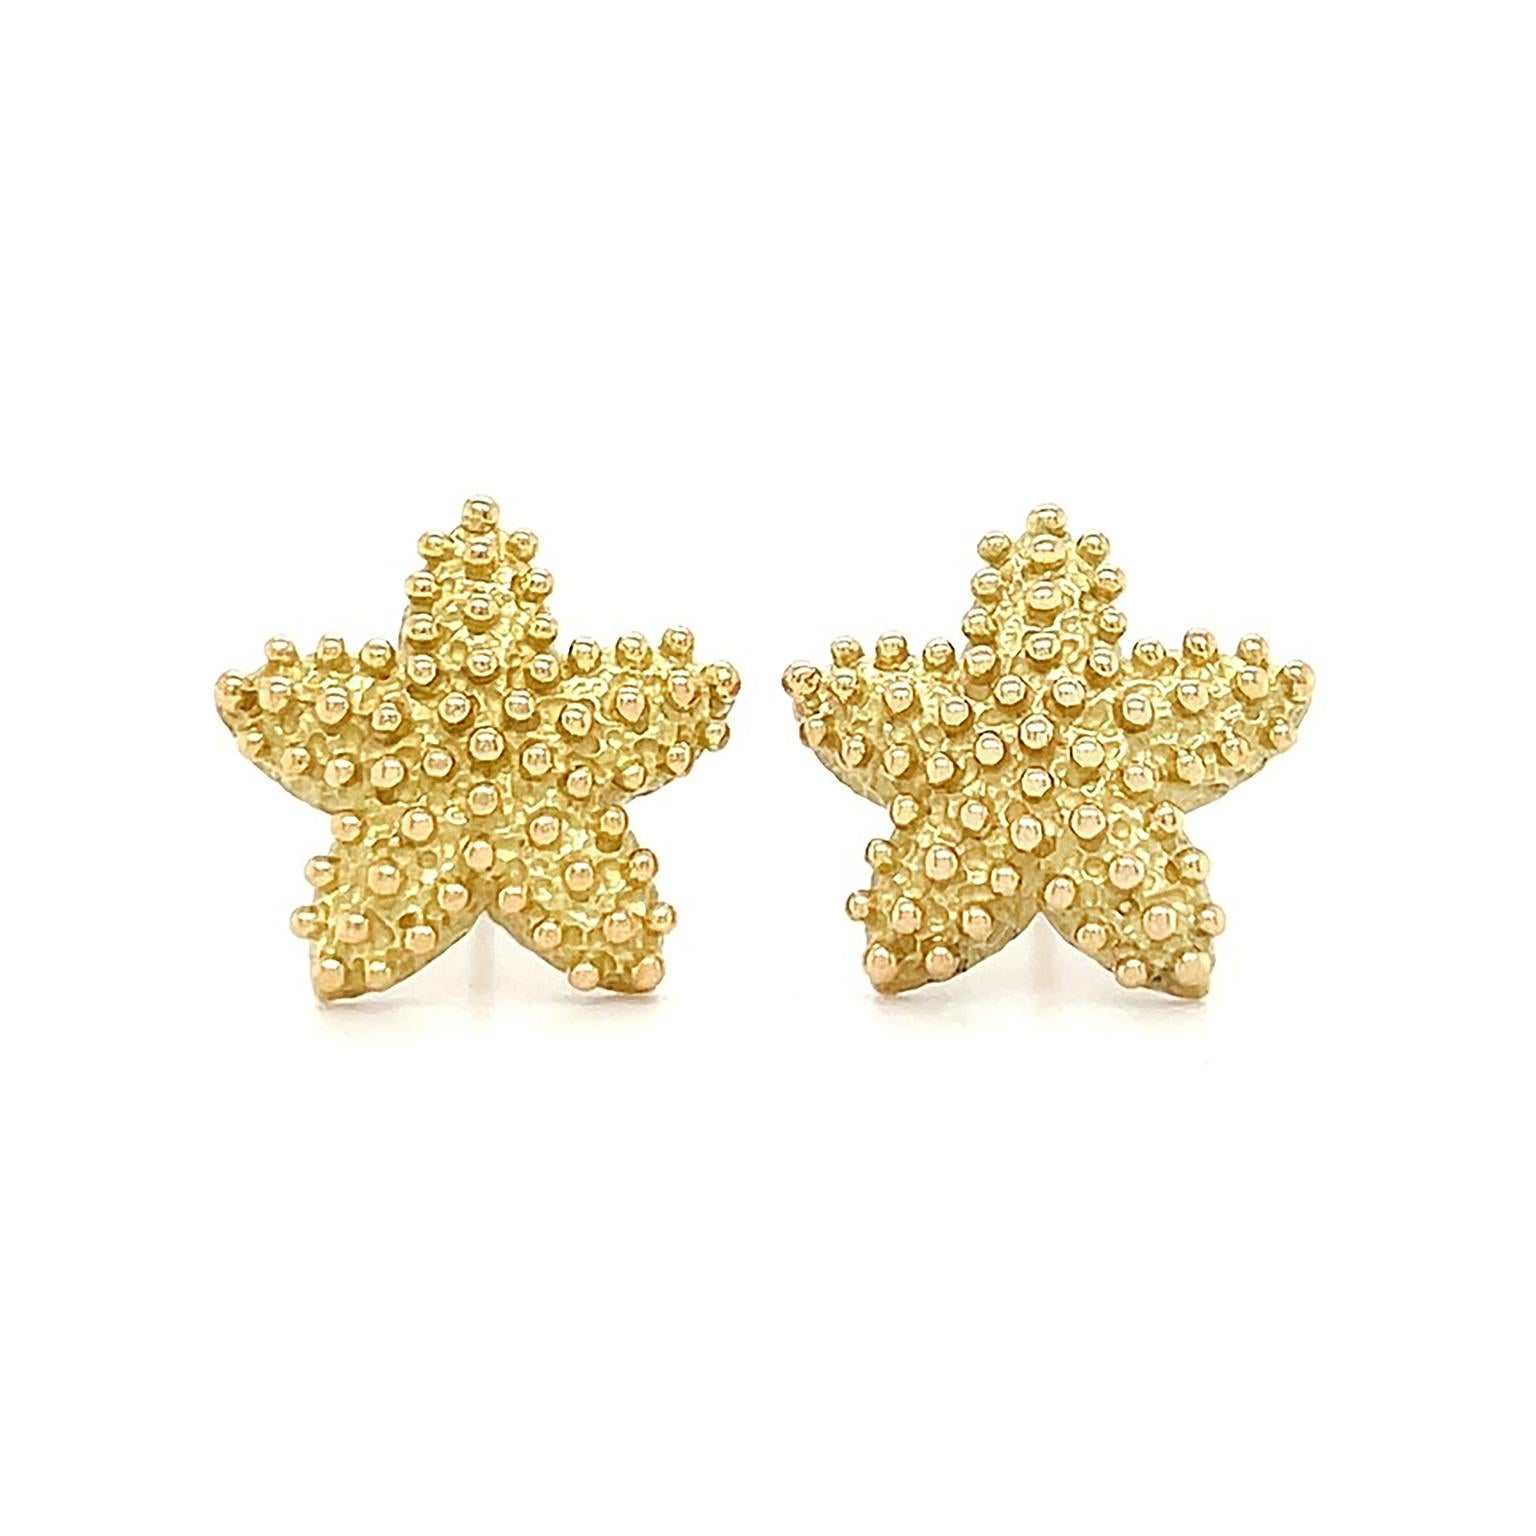 Gold depicts an oceanic animal for these earrings. 18k yellow gold is given texture for a realistic base, while the skin is embellished by small sleek orbs of the metal. Friction backs fasten the earrings, which measure 0.57 inches (width) by 0.57